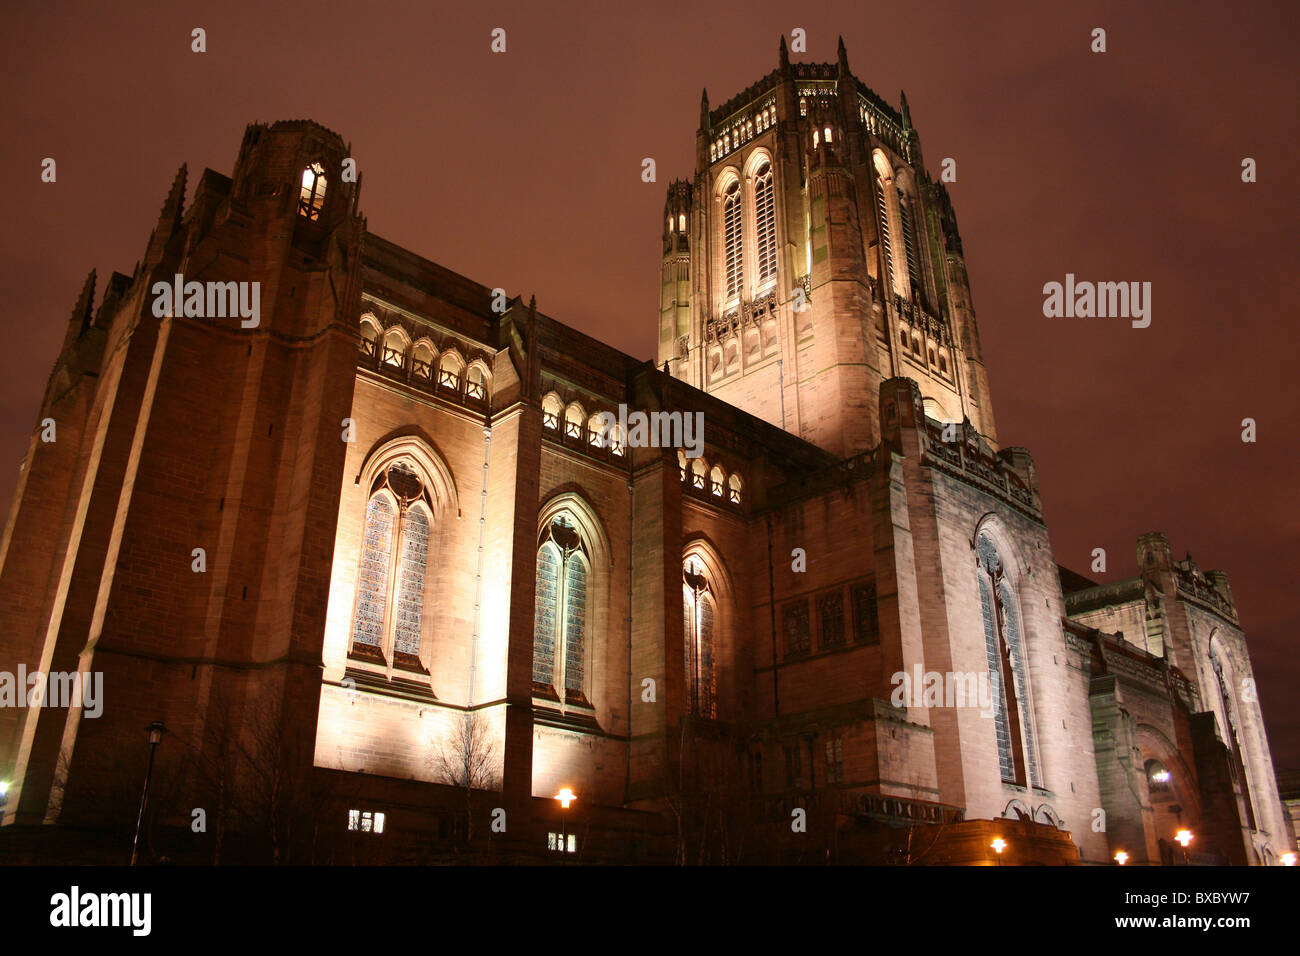 Liverpool Anglican Cathedral Floodlit At Night, Merseyside, England, UK Stock Photo